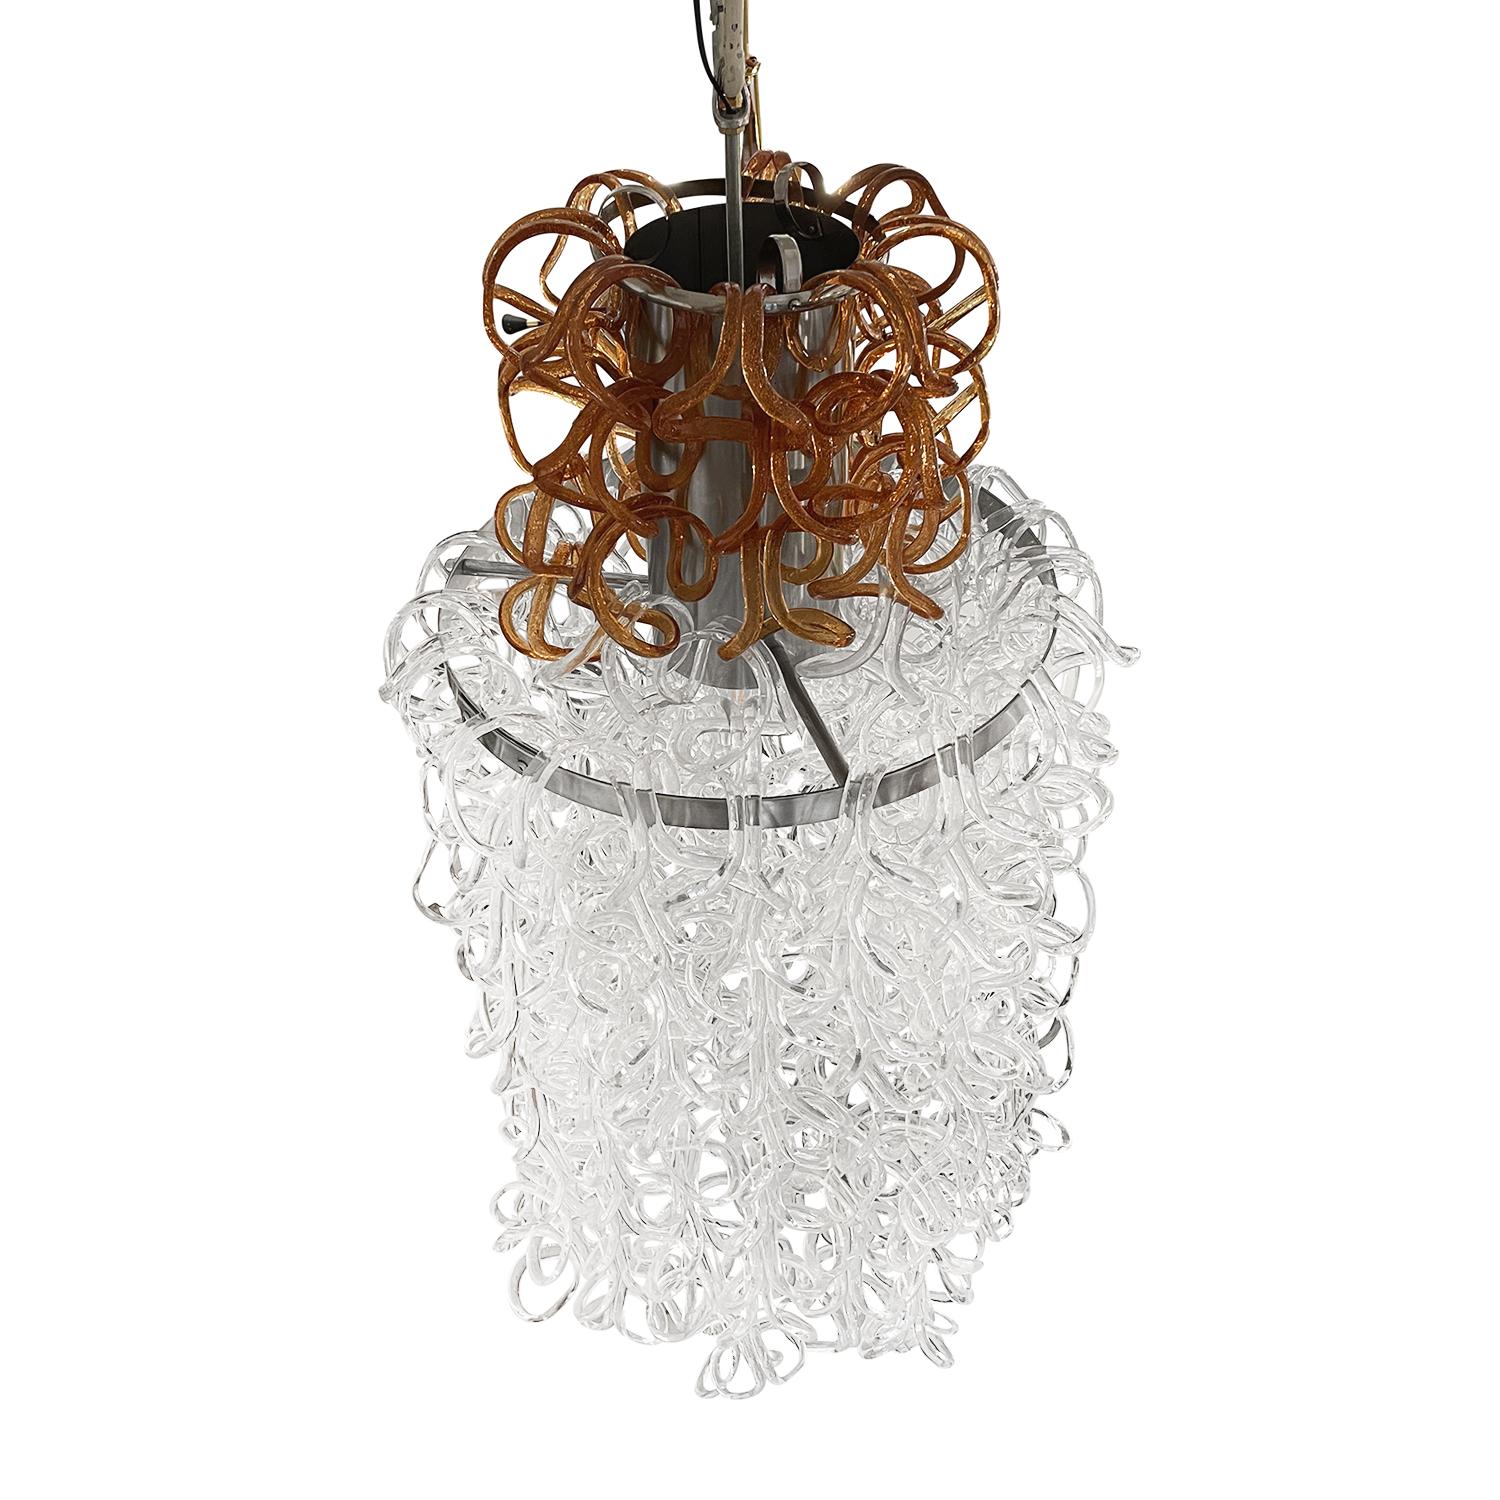 Hand-Crafted 20th Century Italian Mid-Century Crystal Glass Pendant by Angelo Mangiarotti For Sale